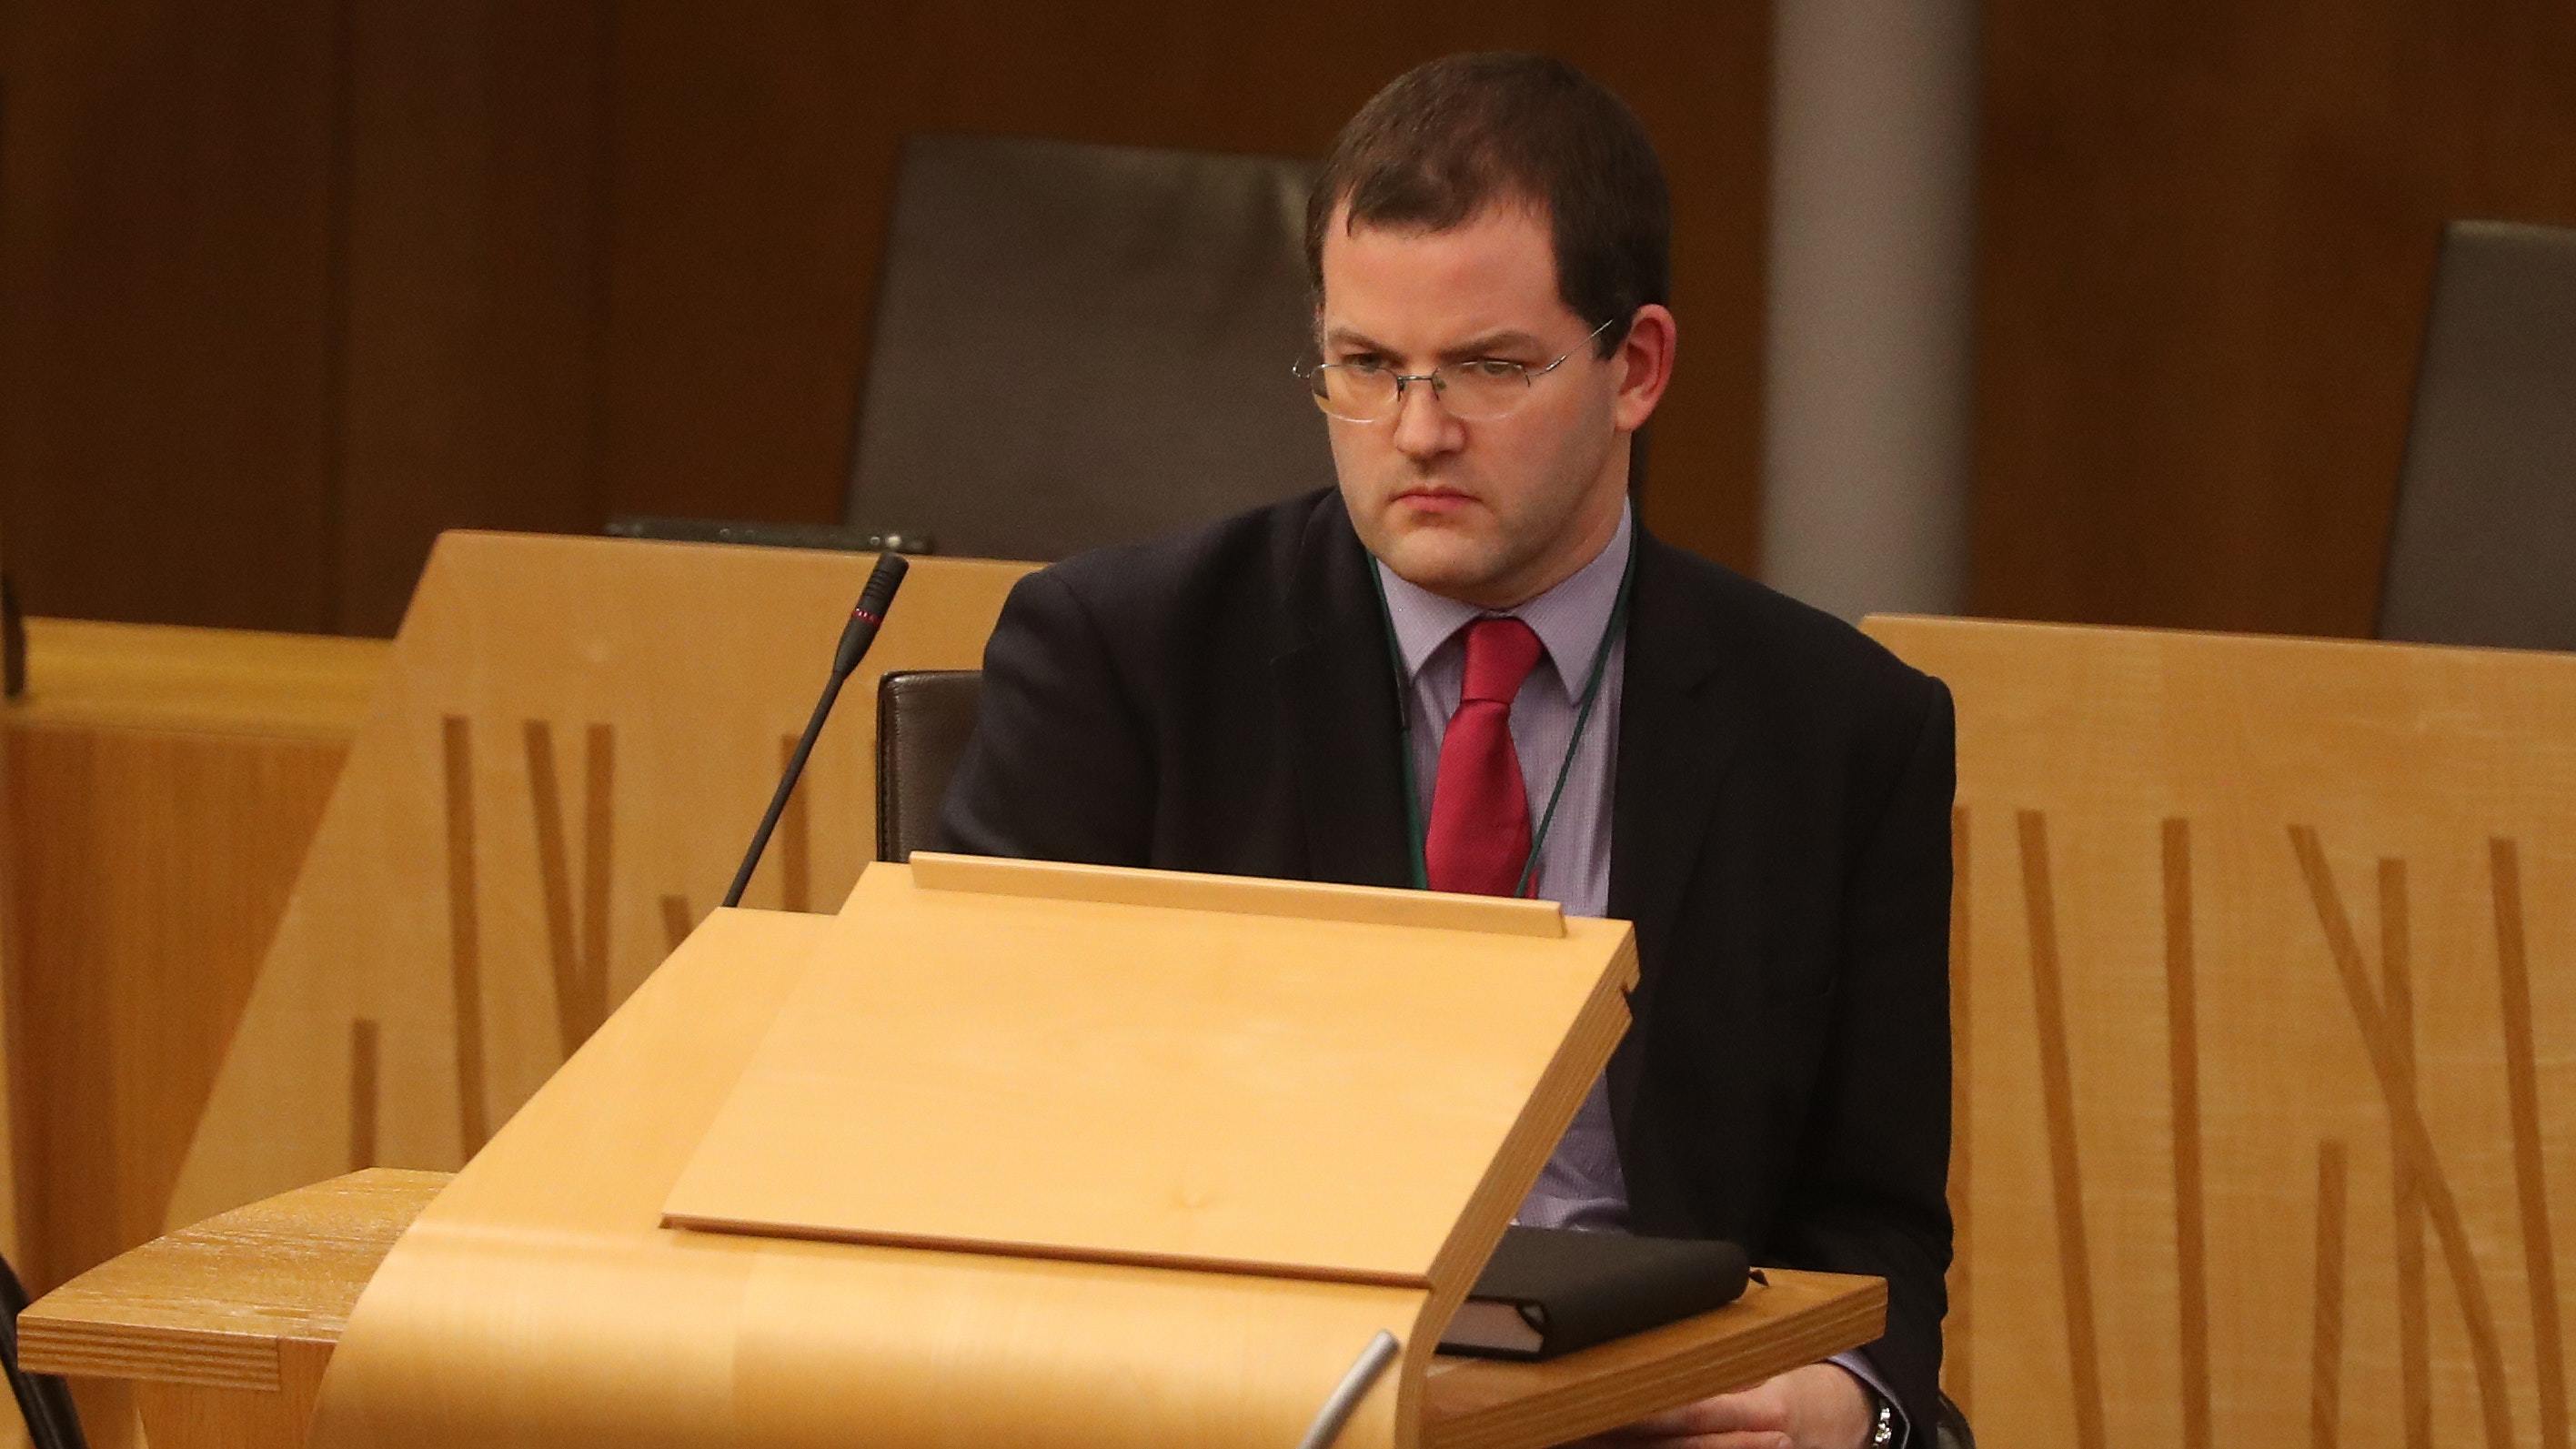 A Scottish Parliament committee wants the Commissioner for Ethical Standards in Public Life to investigate a complaint about Mark McDonald